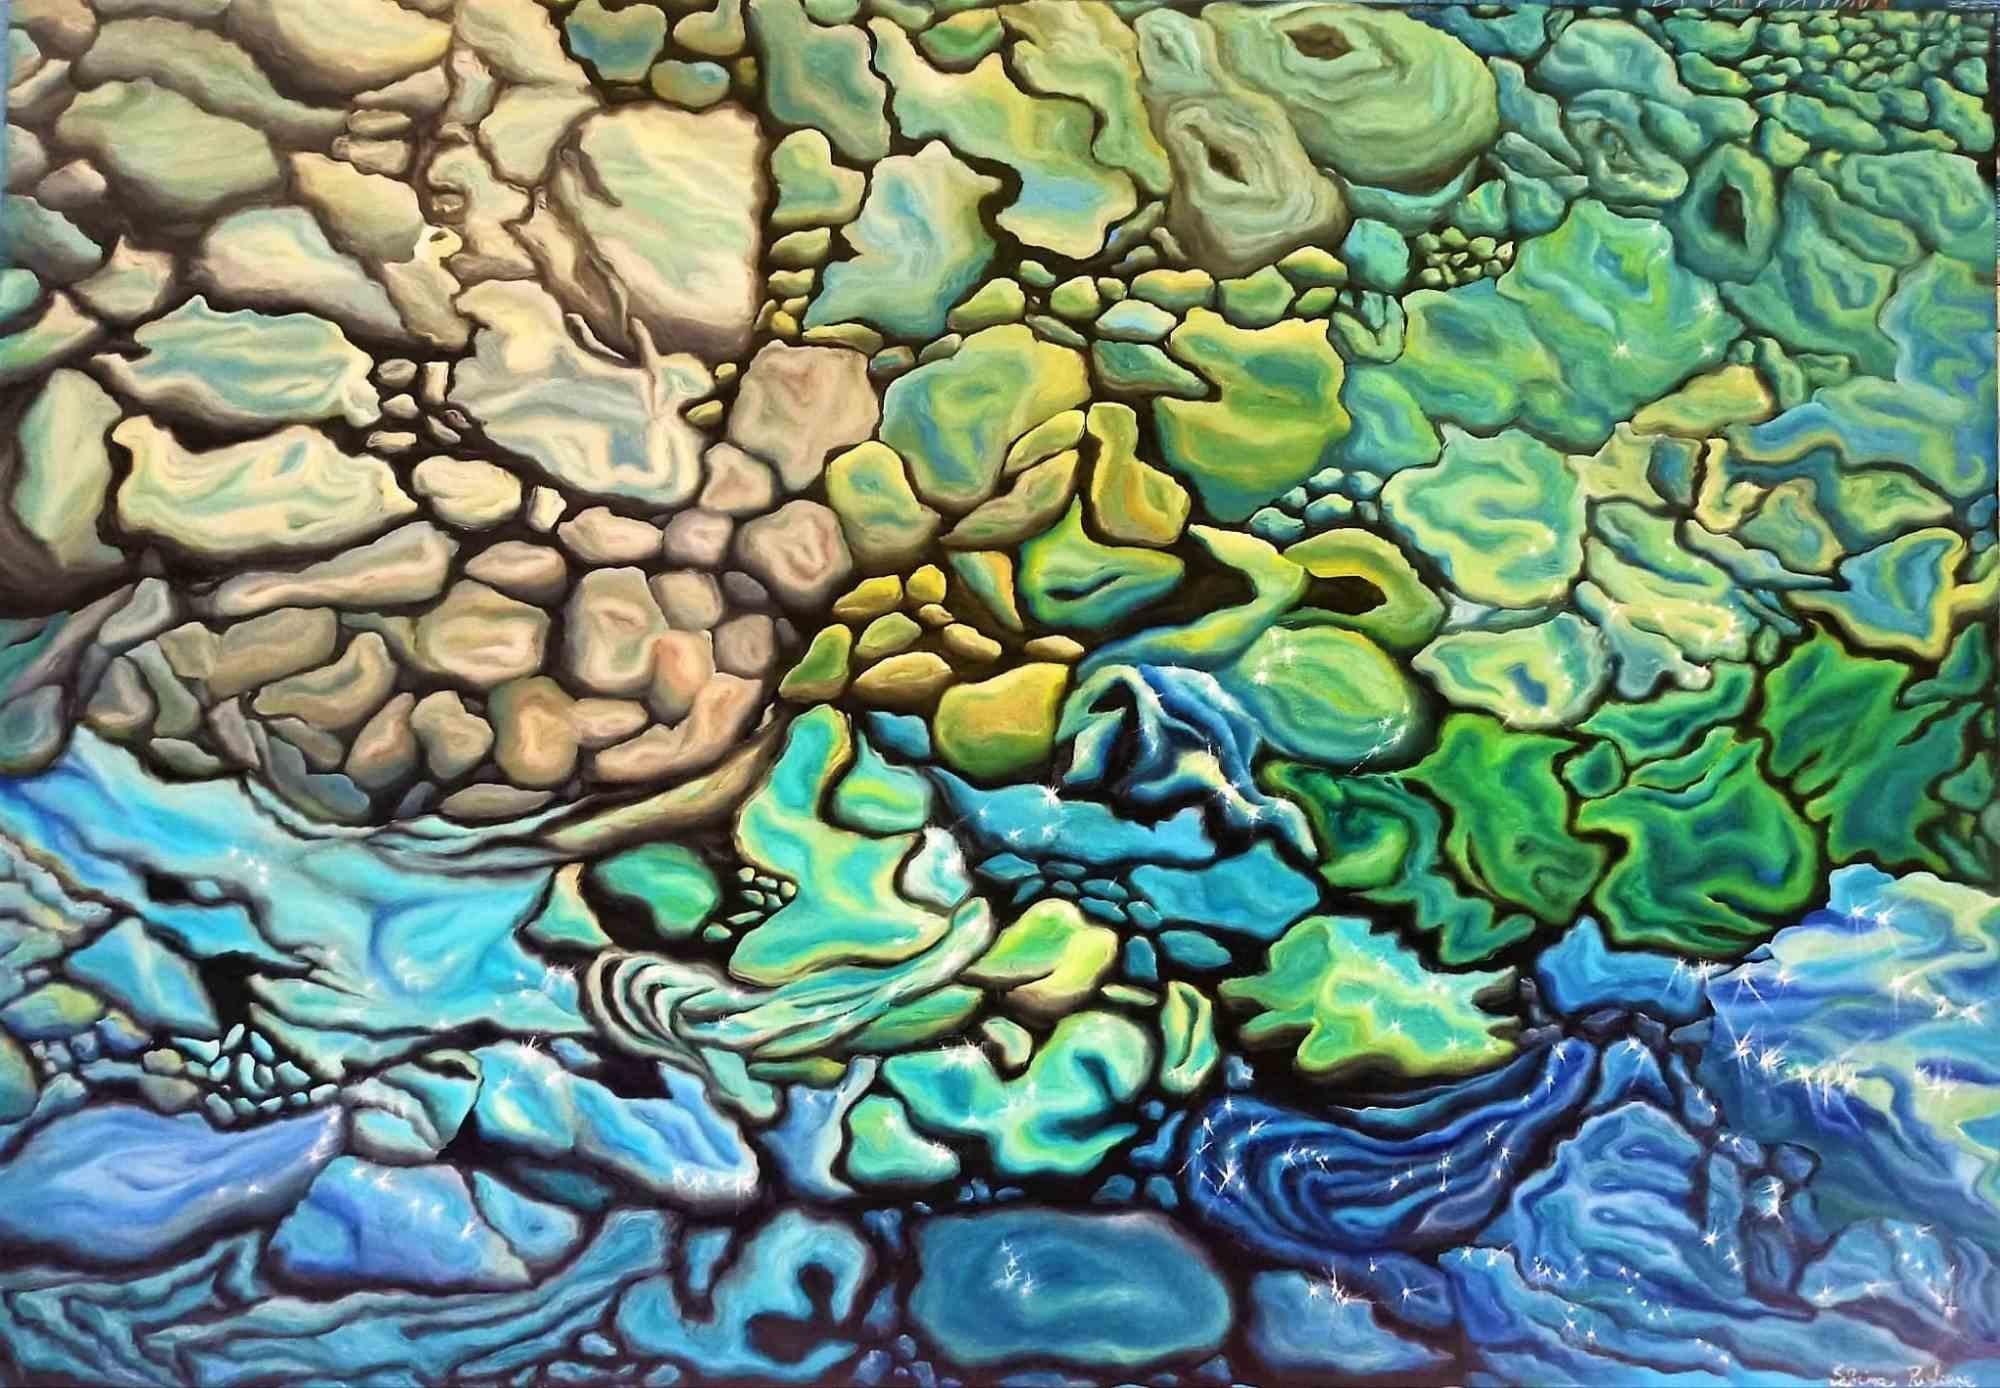 Seabed - Oil Painting by Sabrina Pugliese - 2019